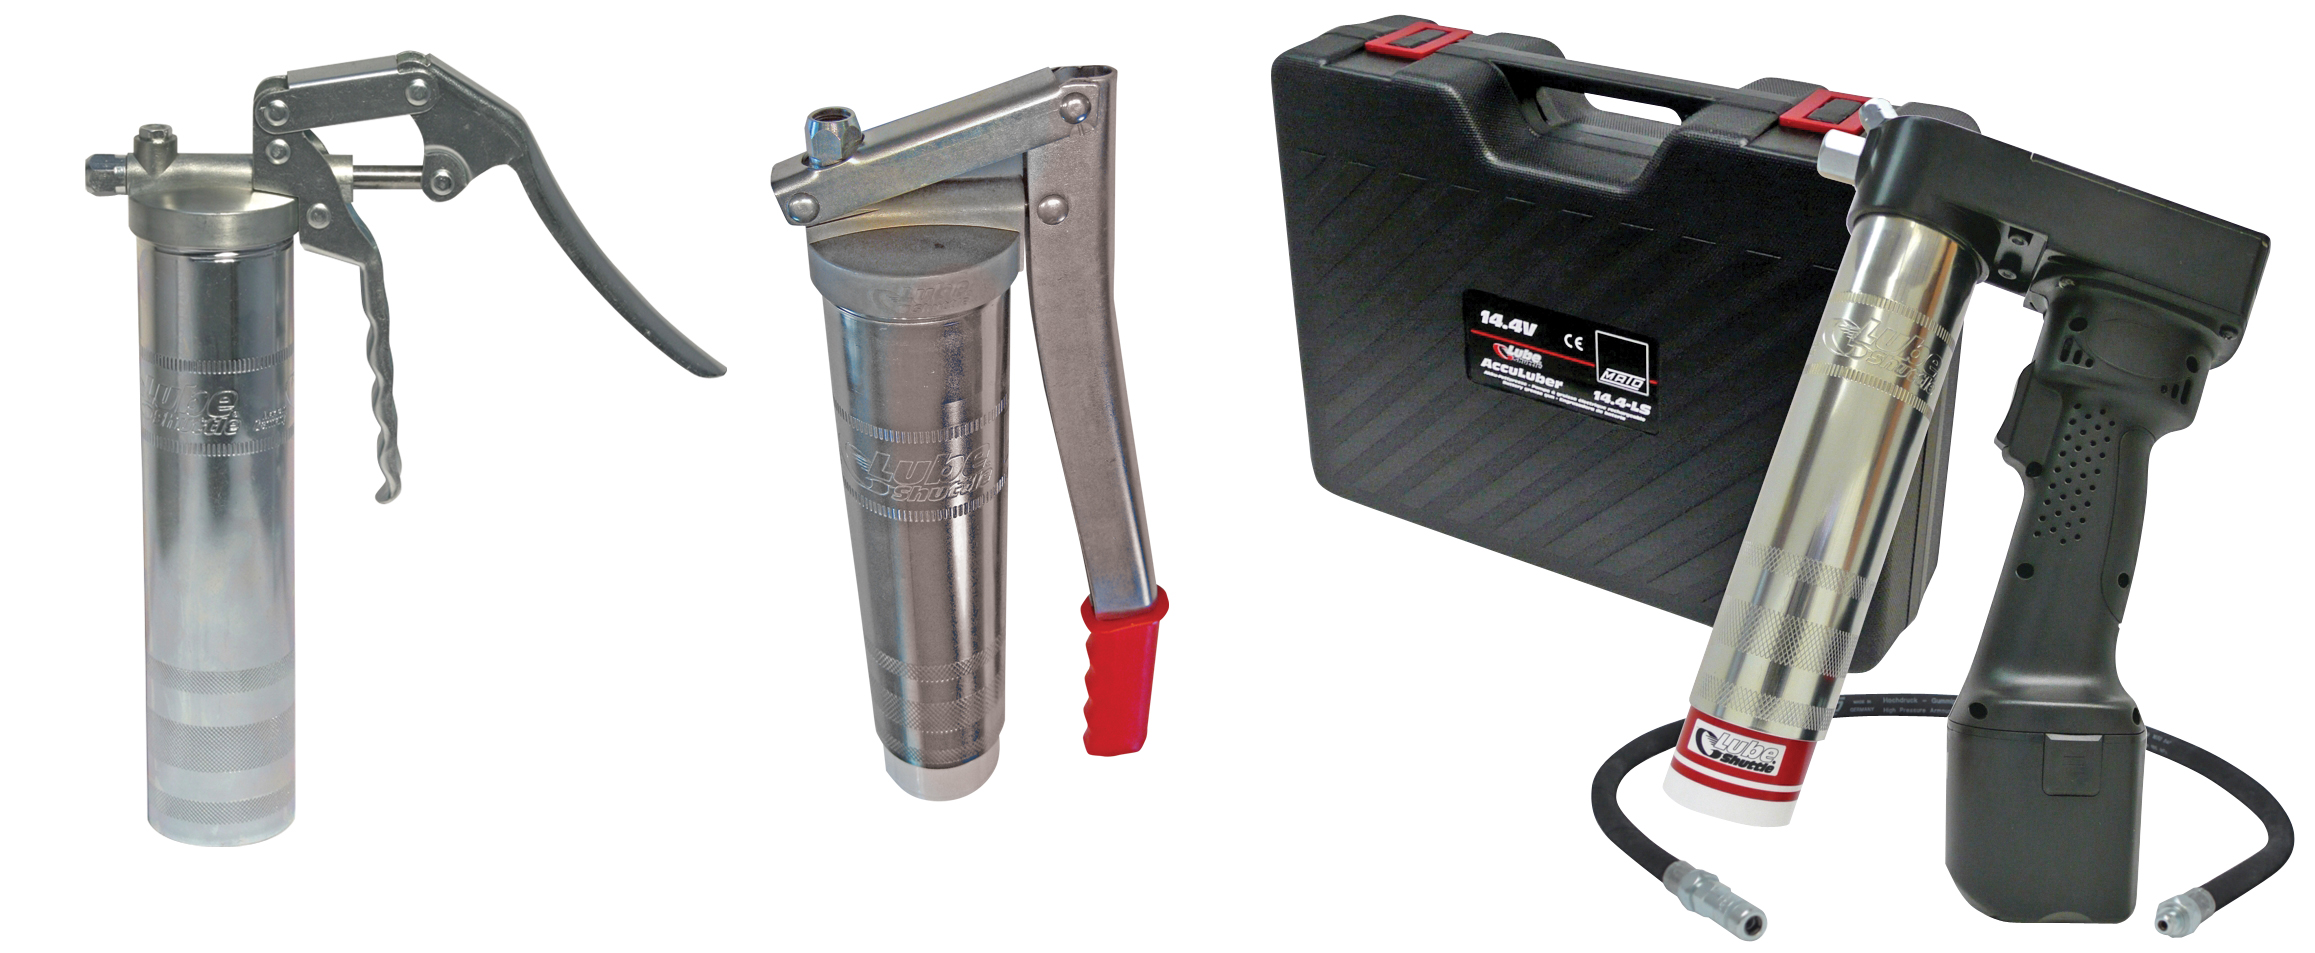 New “Lube-Shuttle” Grease Guns Take the Mess Out Of Routine Equipment Maintenance